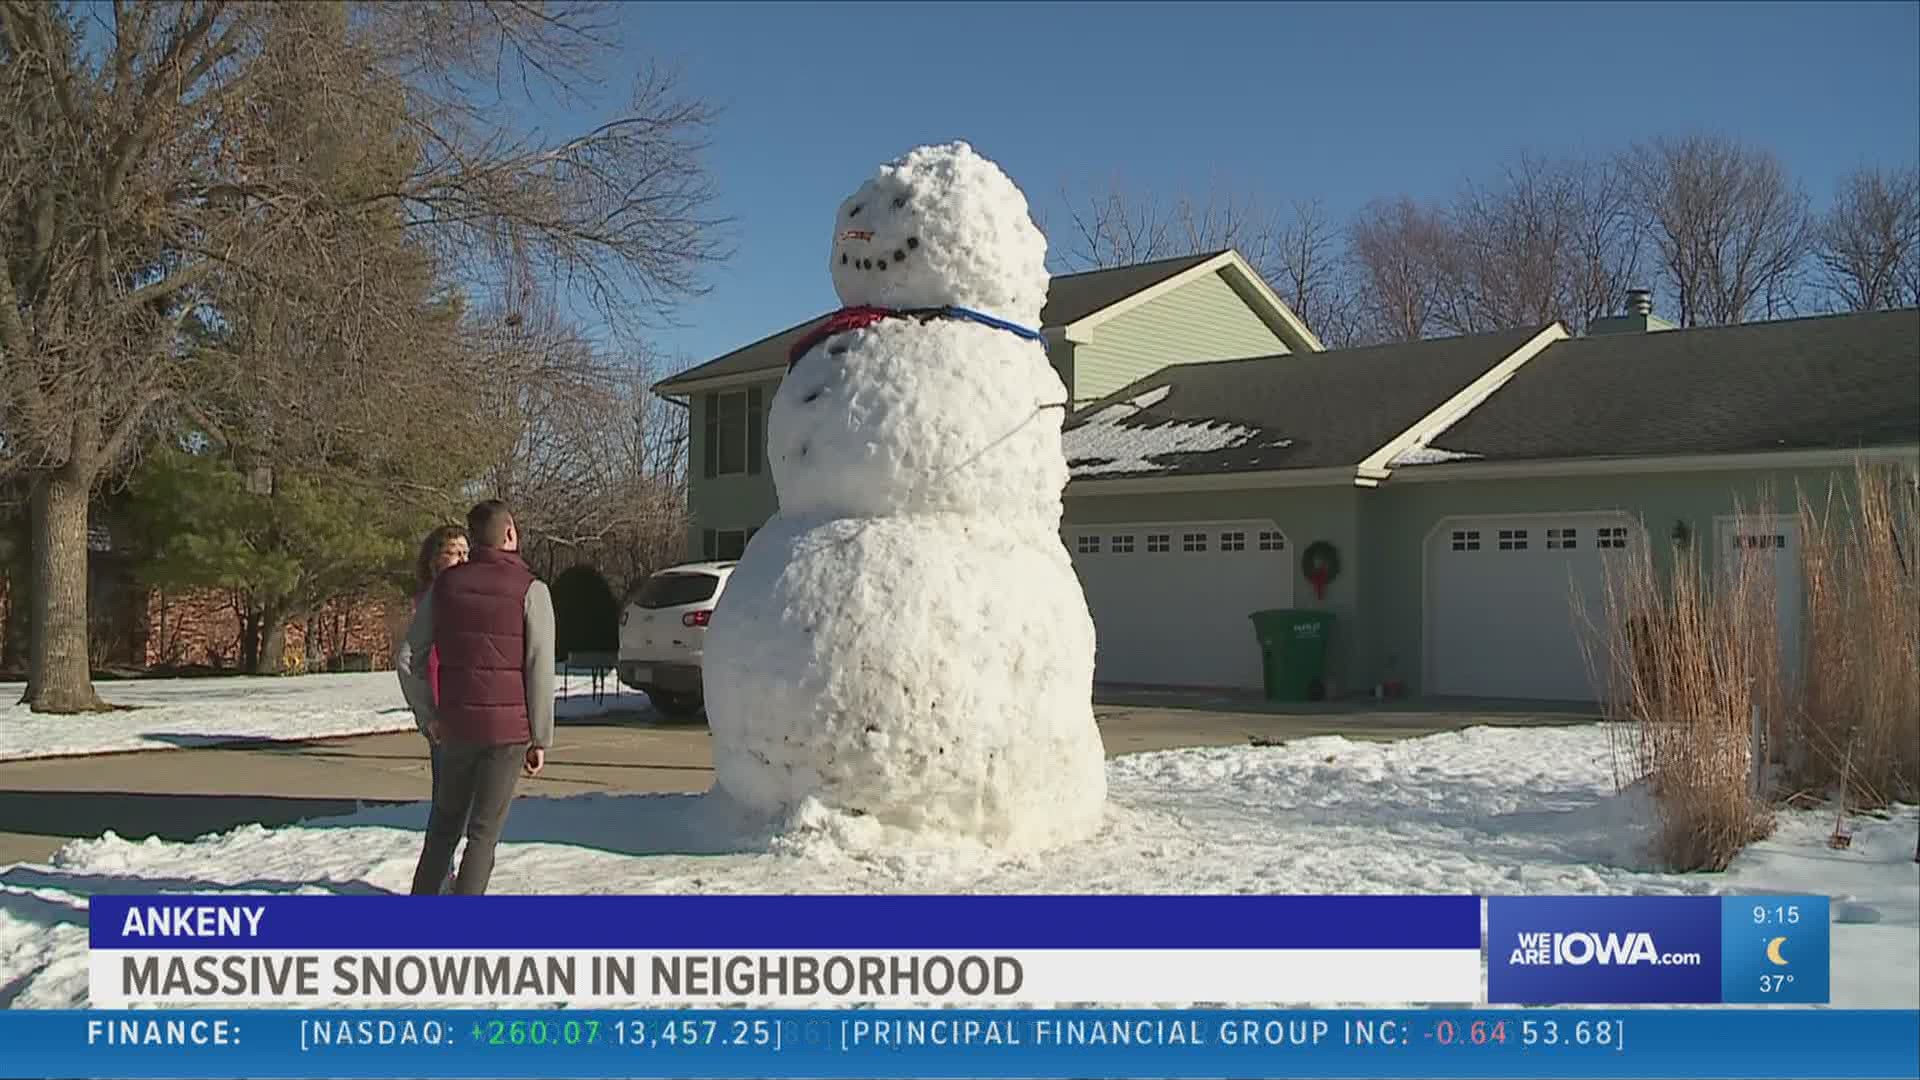 The Peters family built a 15-foot tall snowman in an effort to do something fun and unique over winter break. They succeeded!